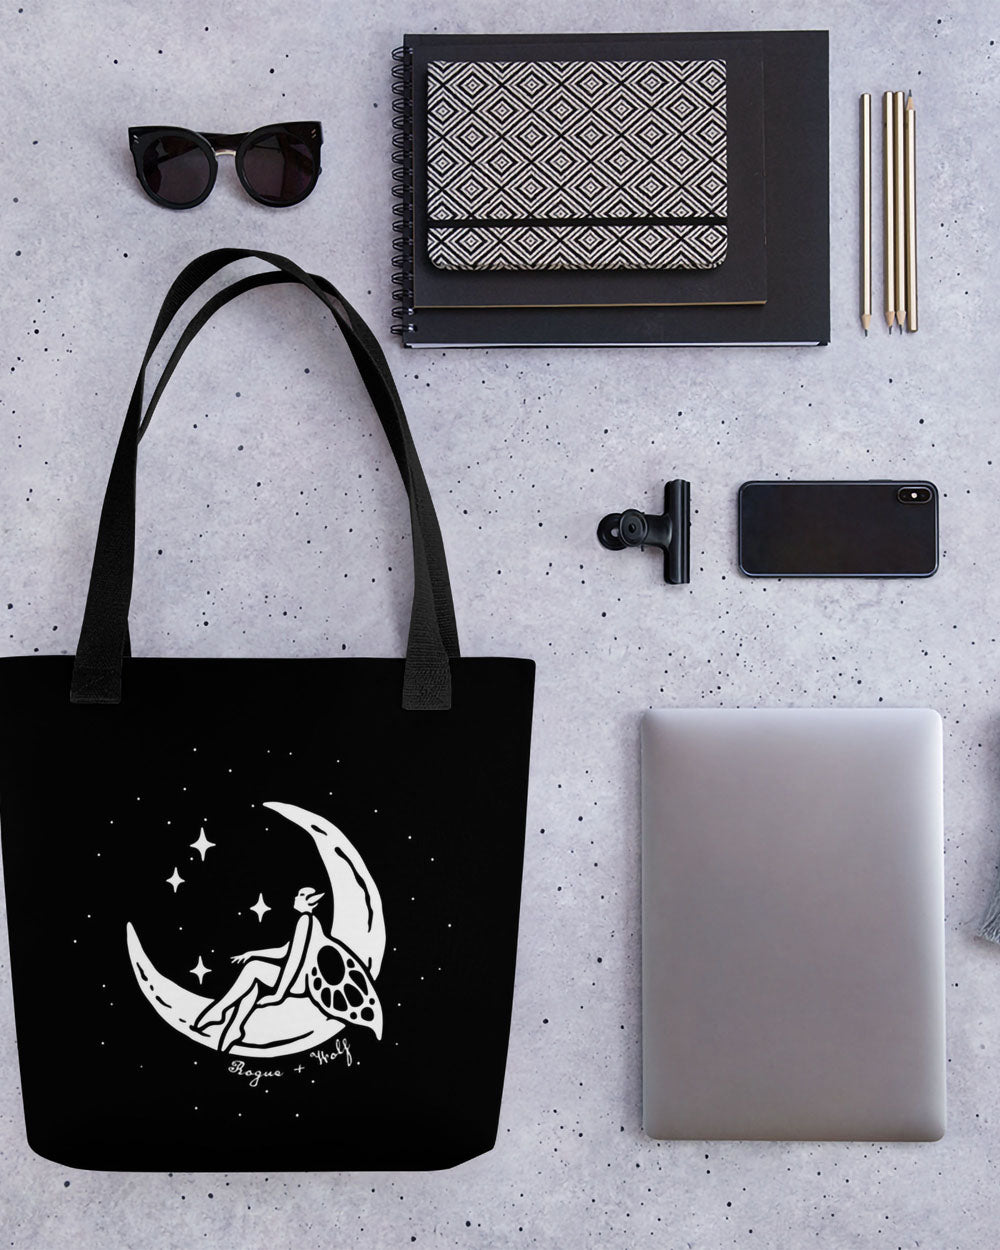 The Dark Side Of The Moon Black Tote Bag